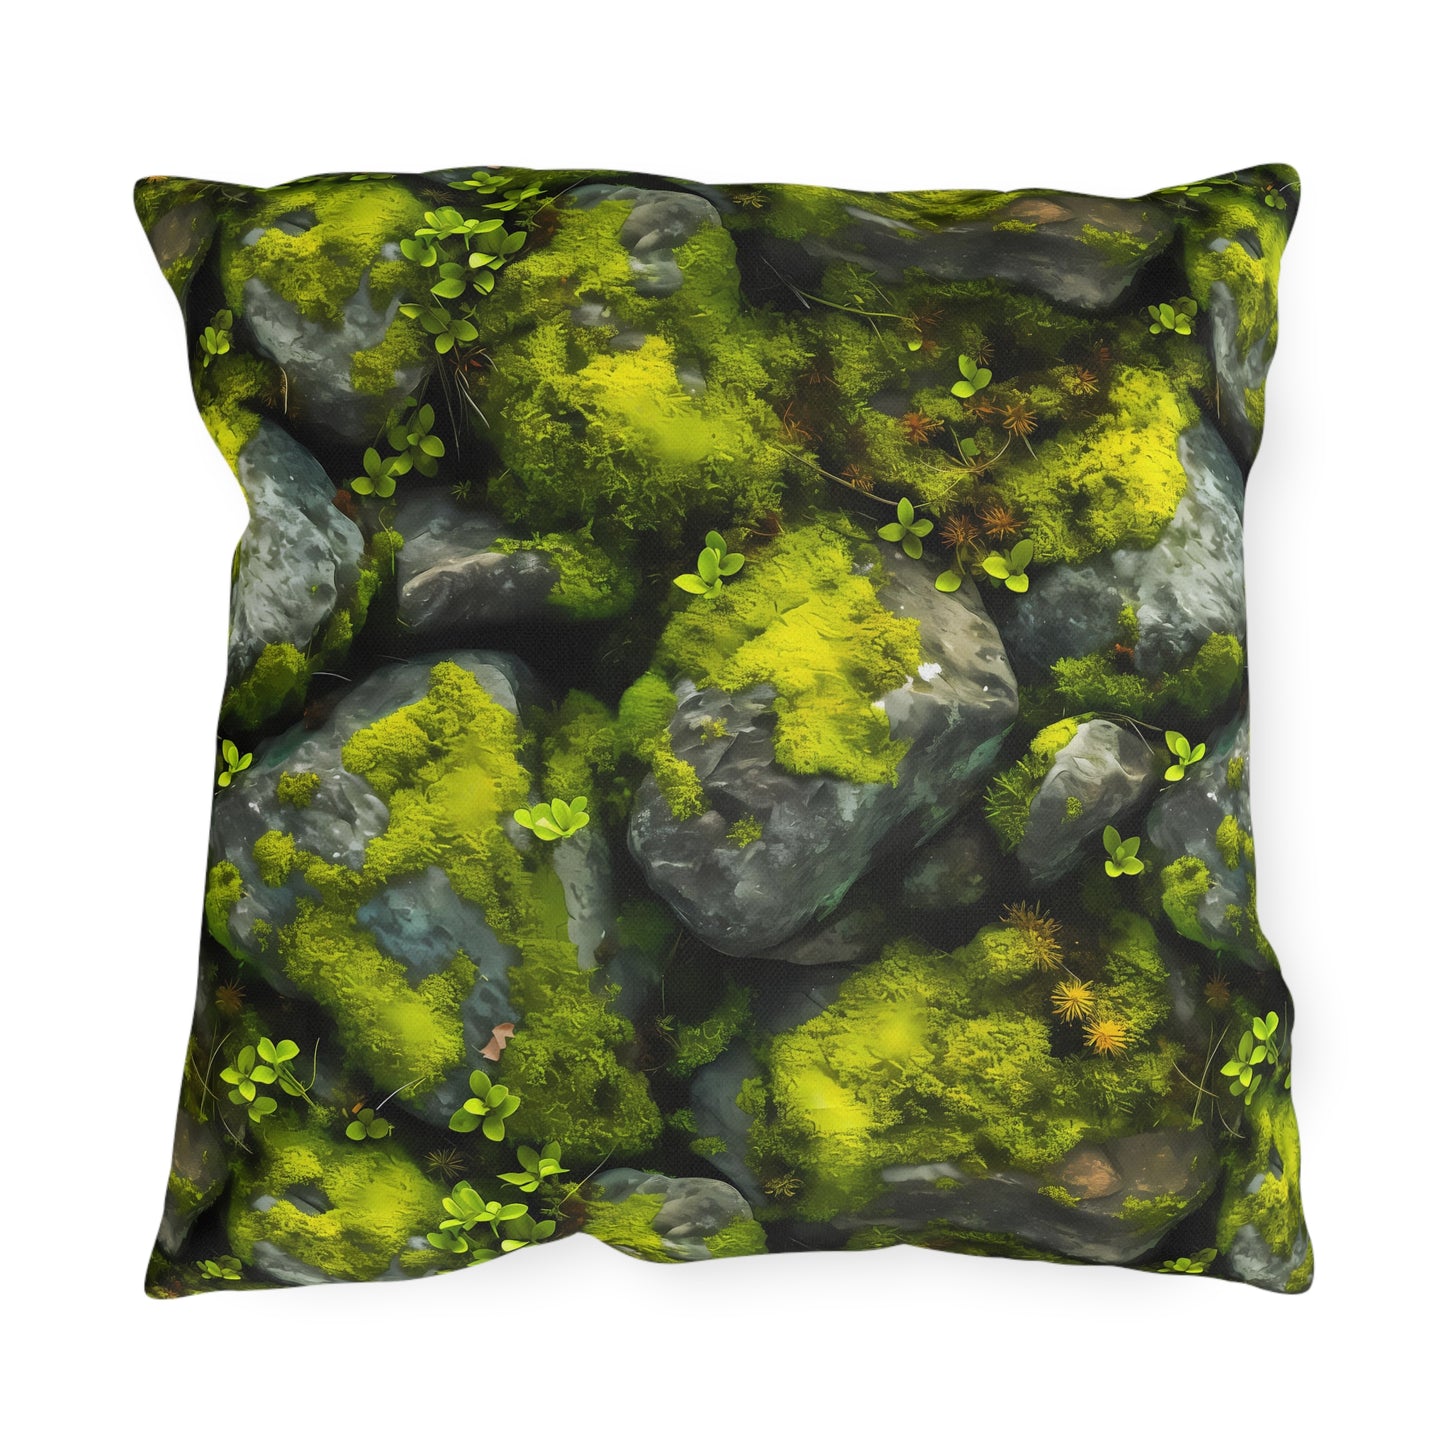 Outdoor Pillow | Moss Covered Rocks Throw Pillow from The Curated Goose